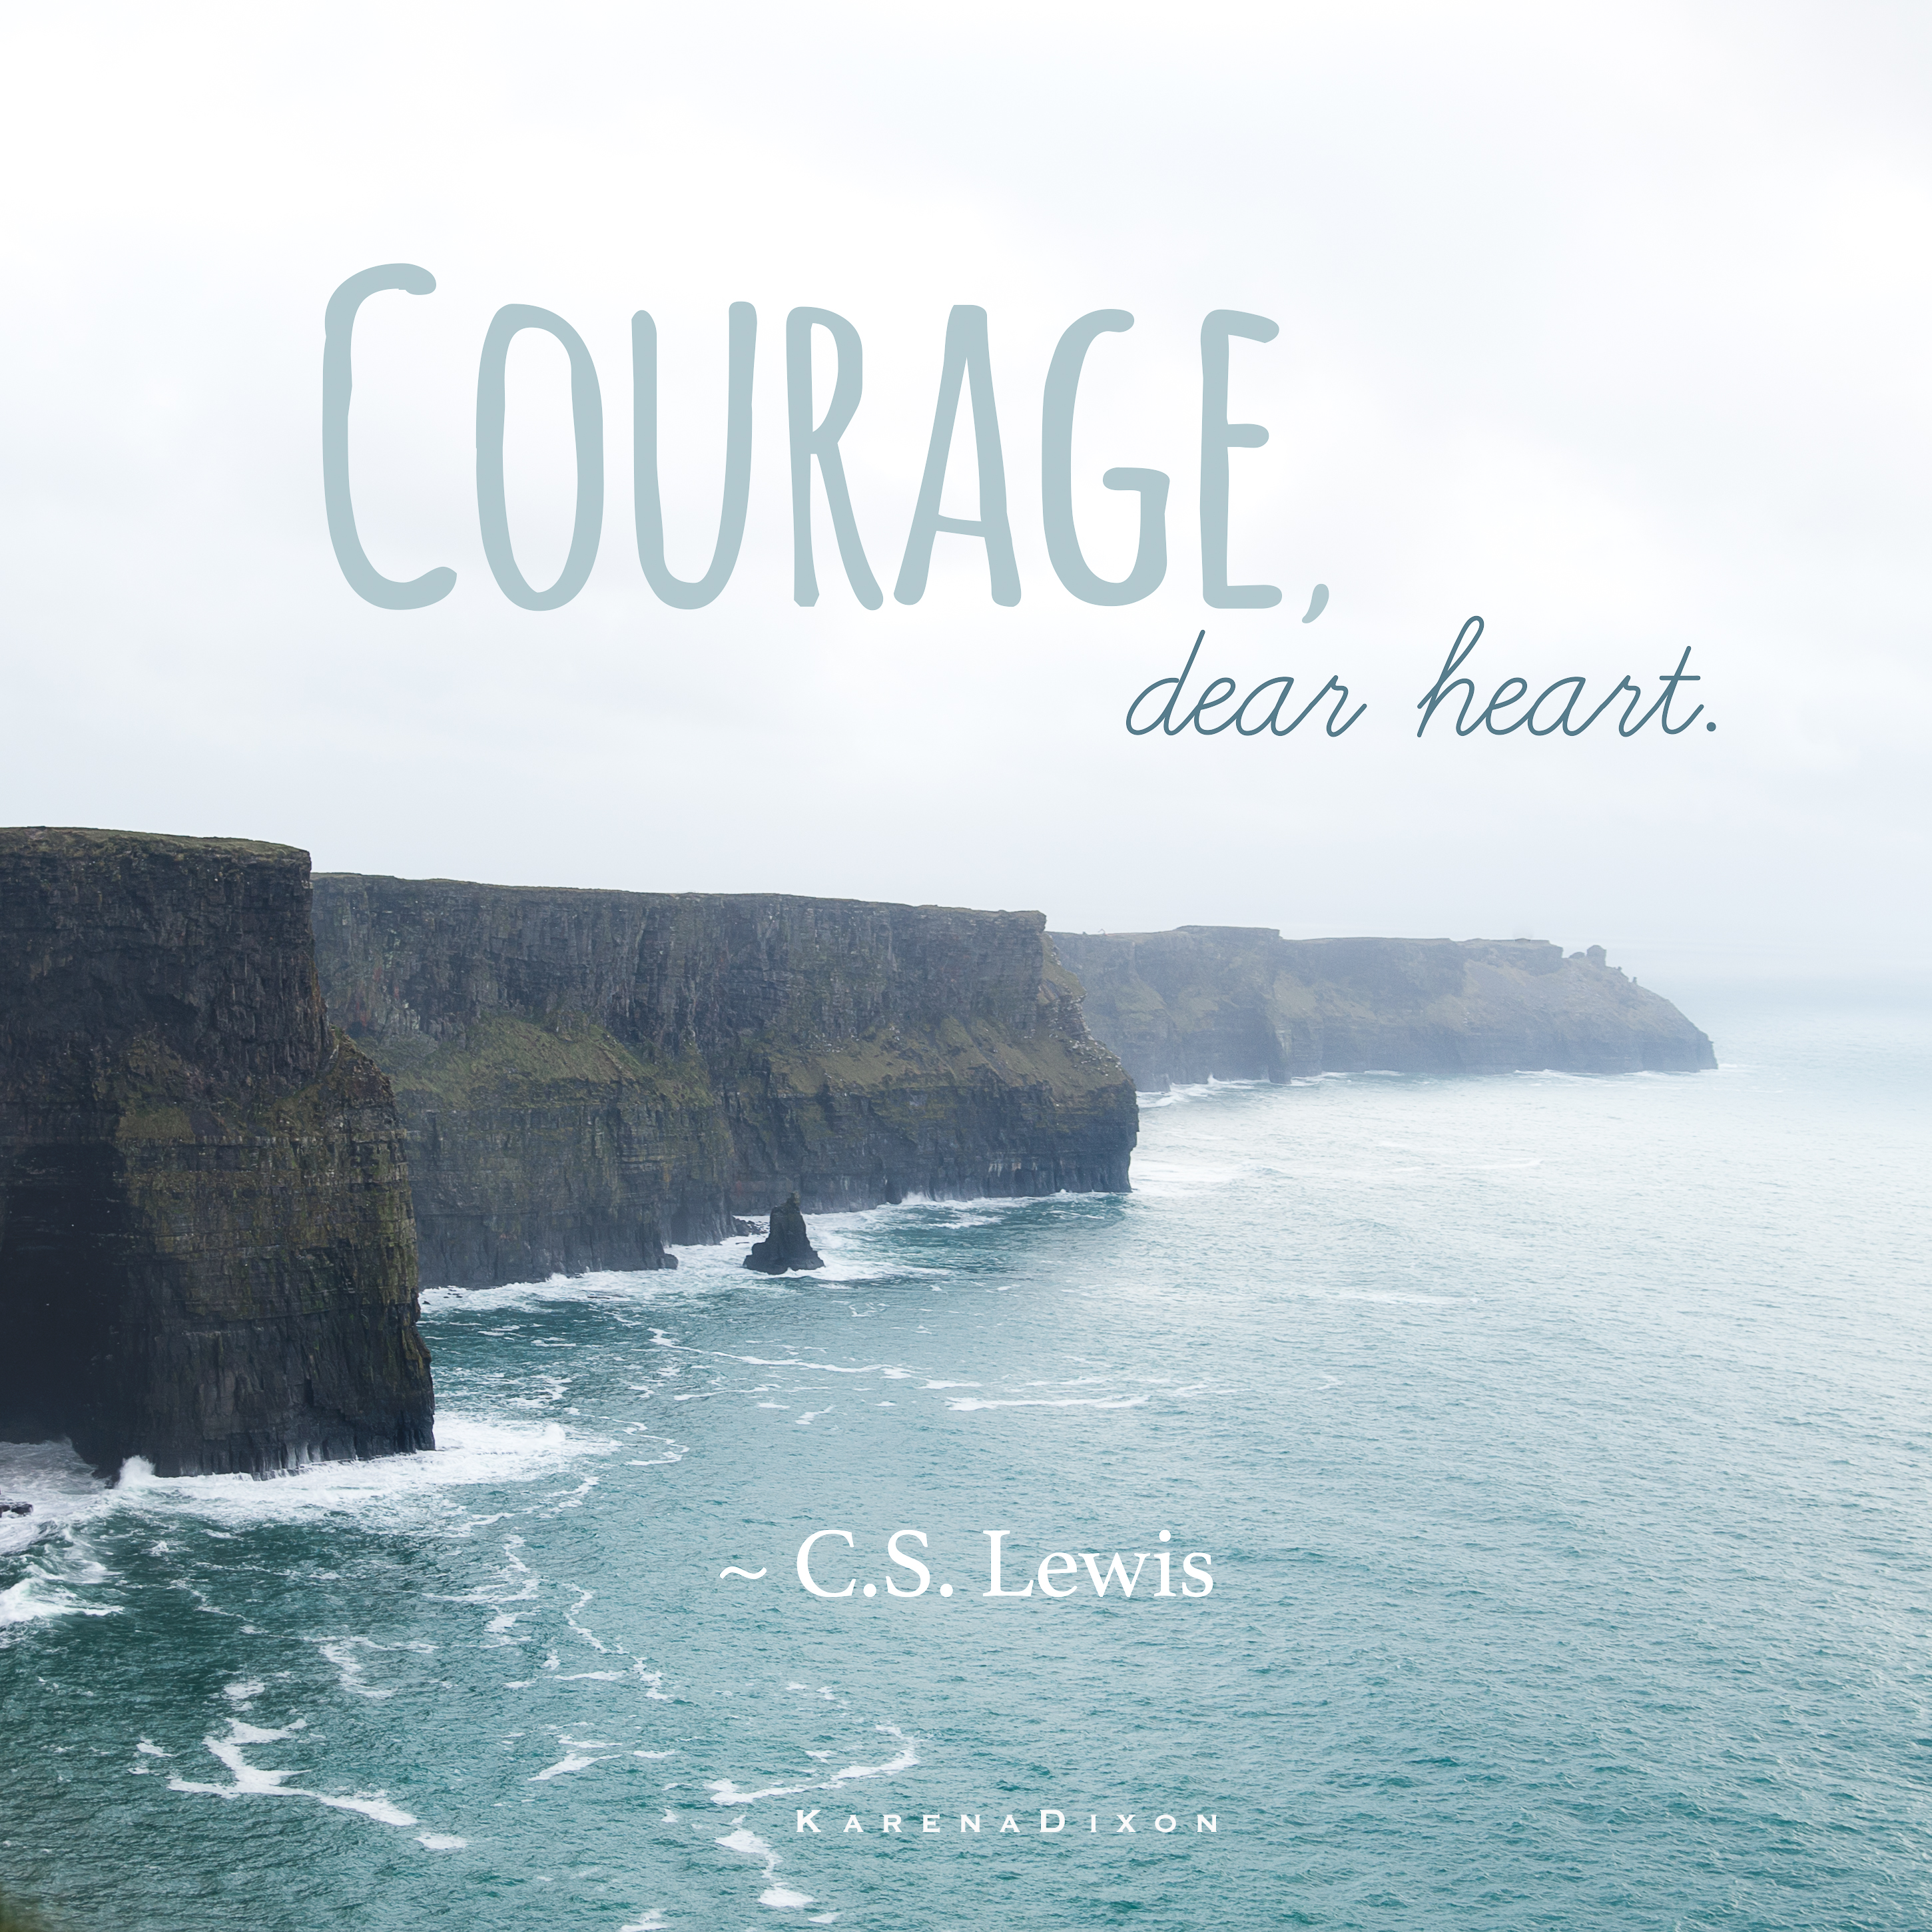 C.S. Lewis adn the Cliffs of Moher